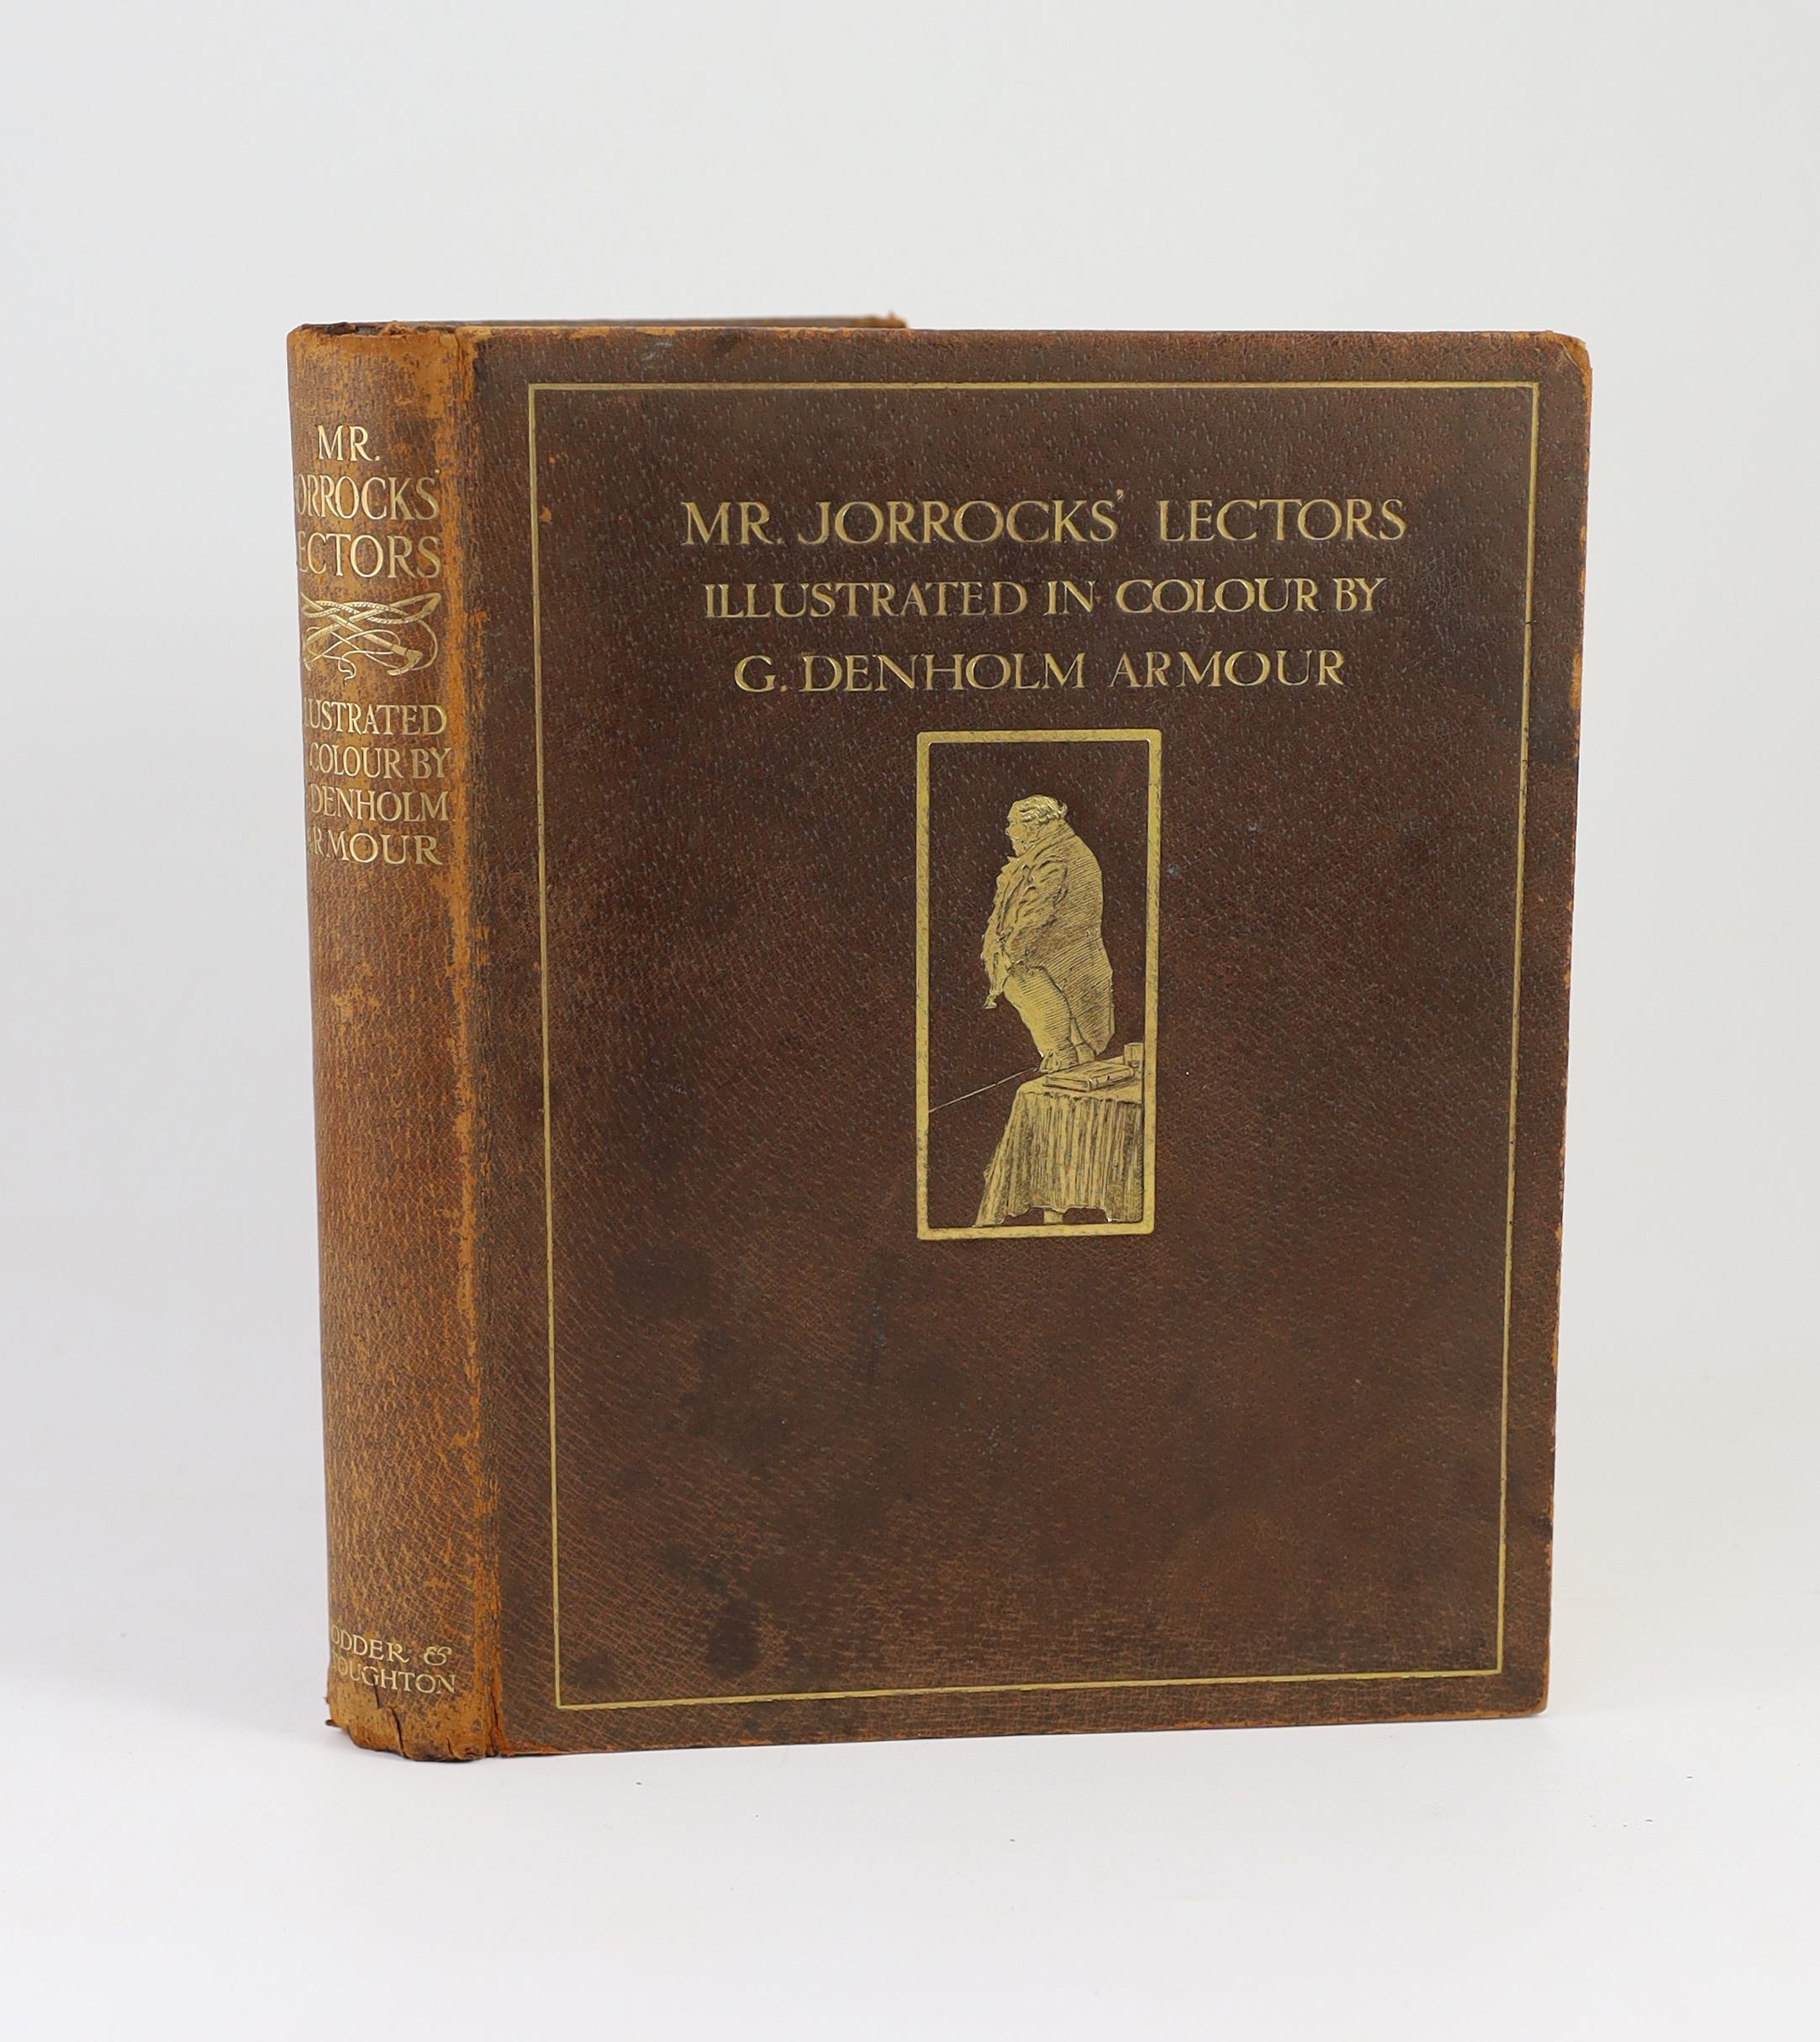 Surtees, Robert Smith - Mr Jorrocks’ Lectors, one of 350, signed and illustrated with 25 tipped-in colour plates by G. Denholm Armour, 4to, brown morocco gilt, Hodder and Stoughton, 1910